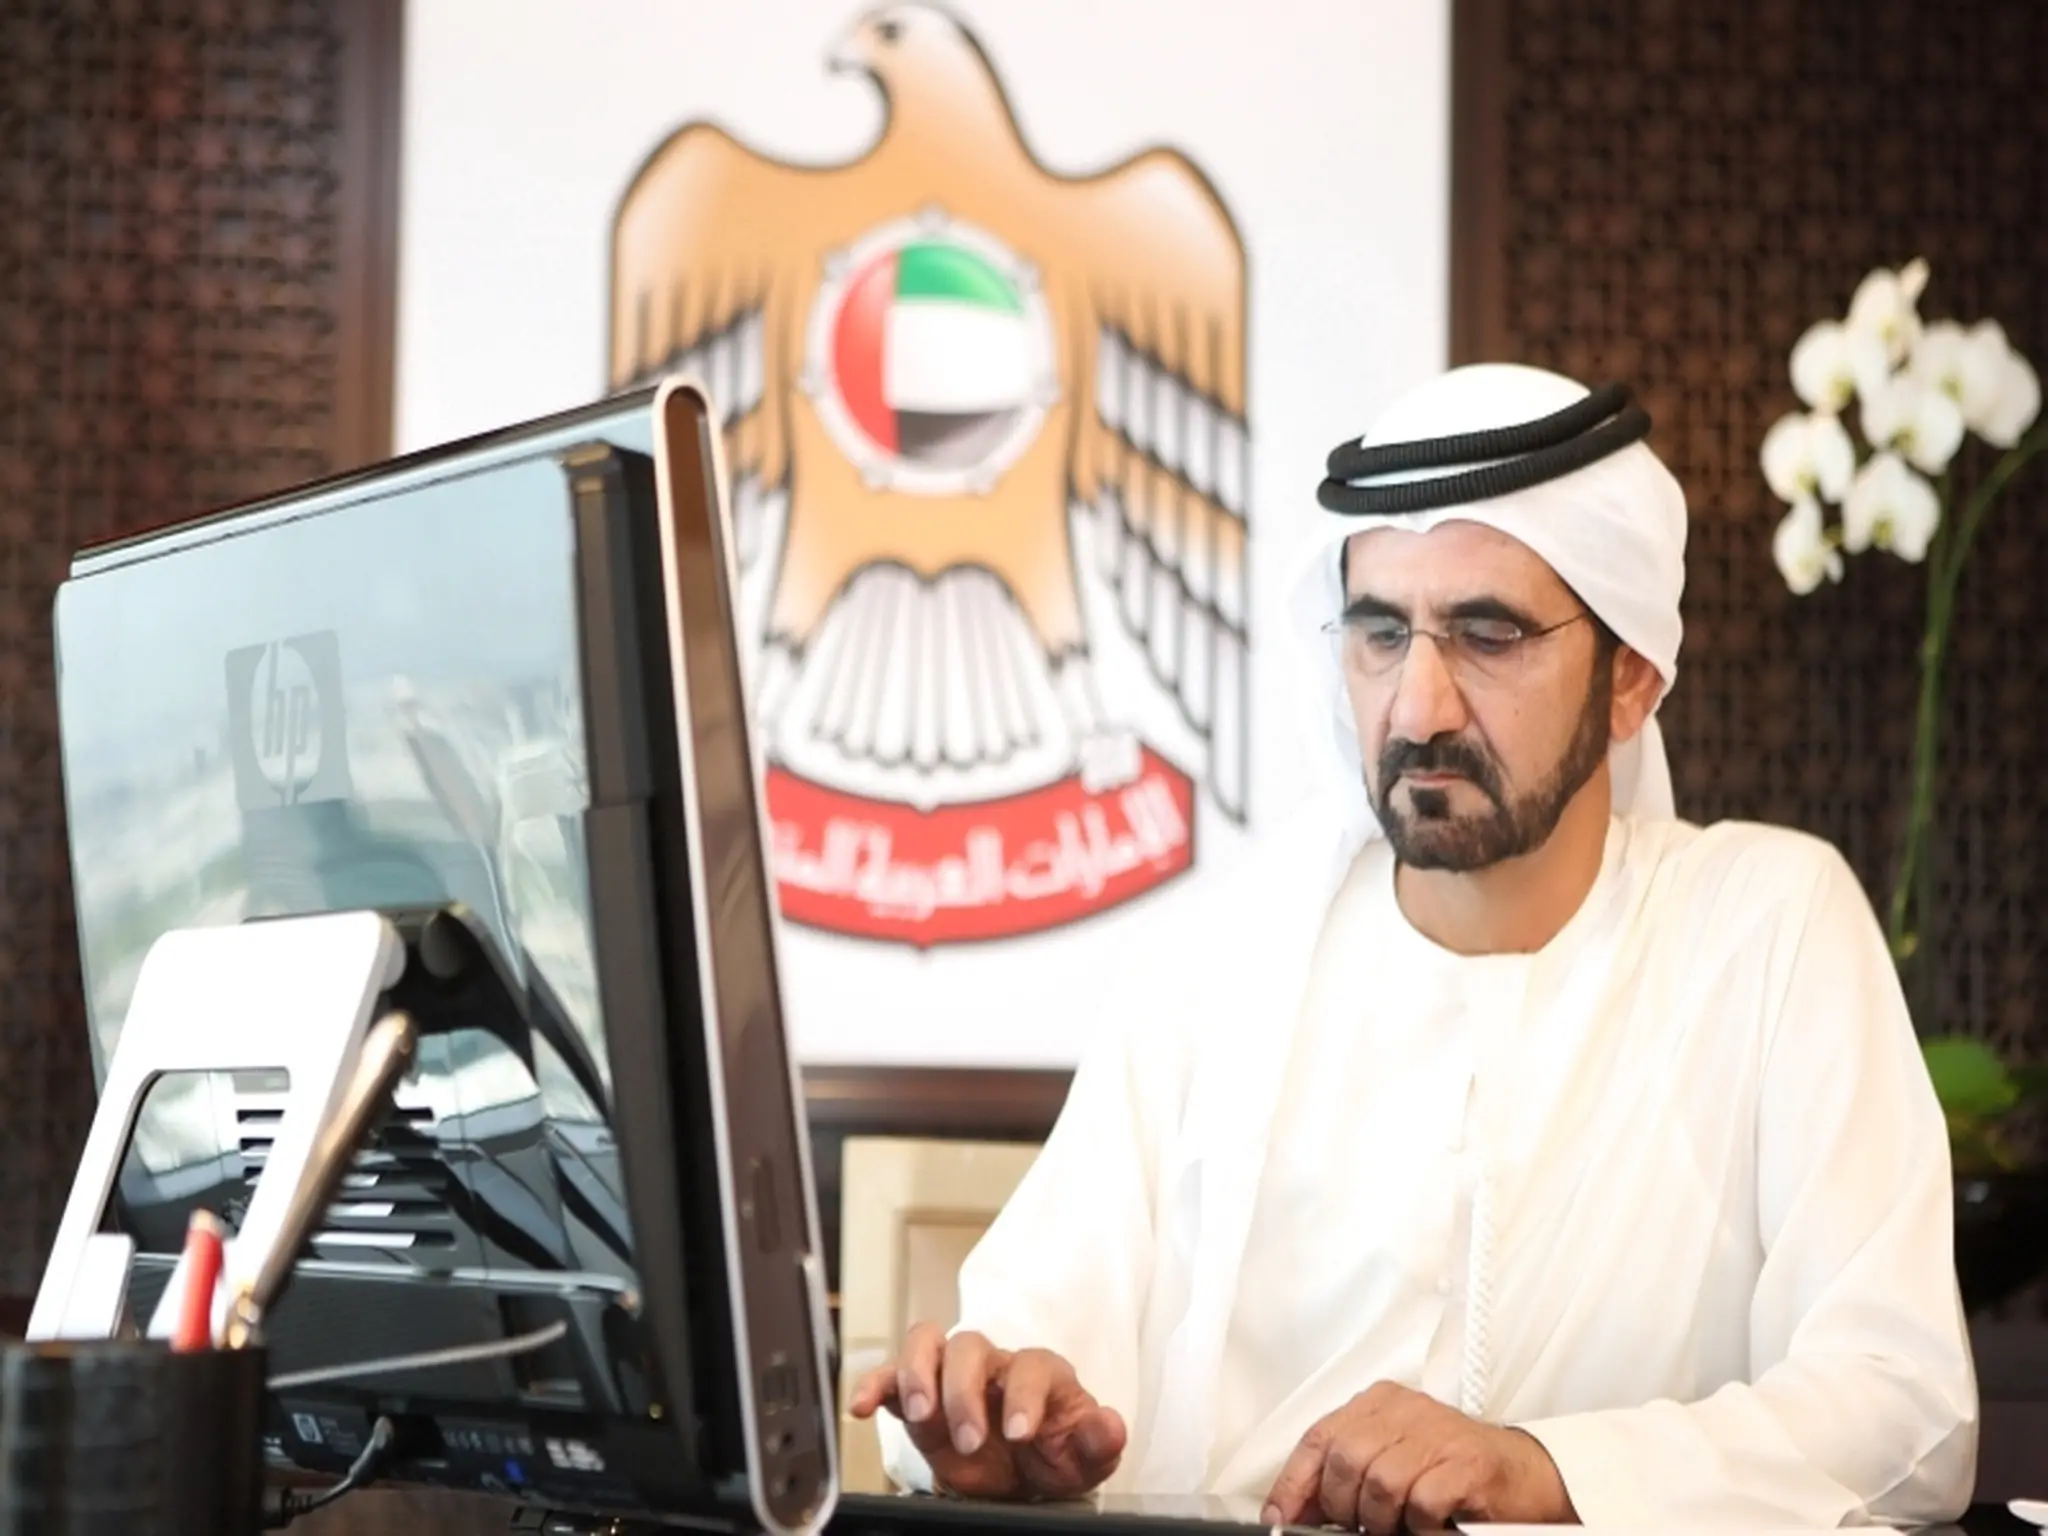 UAE: Organizing a day for employment in 8 areas, including shopping centers, healthcare, retail and information technology